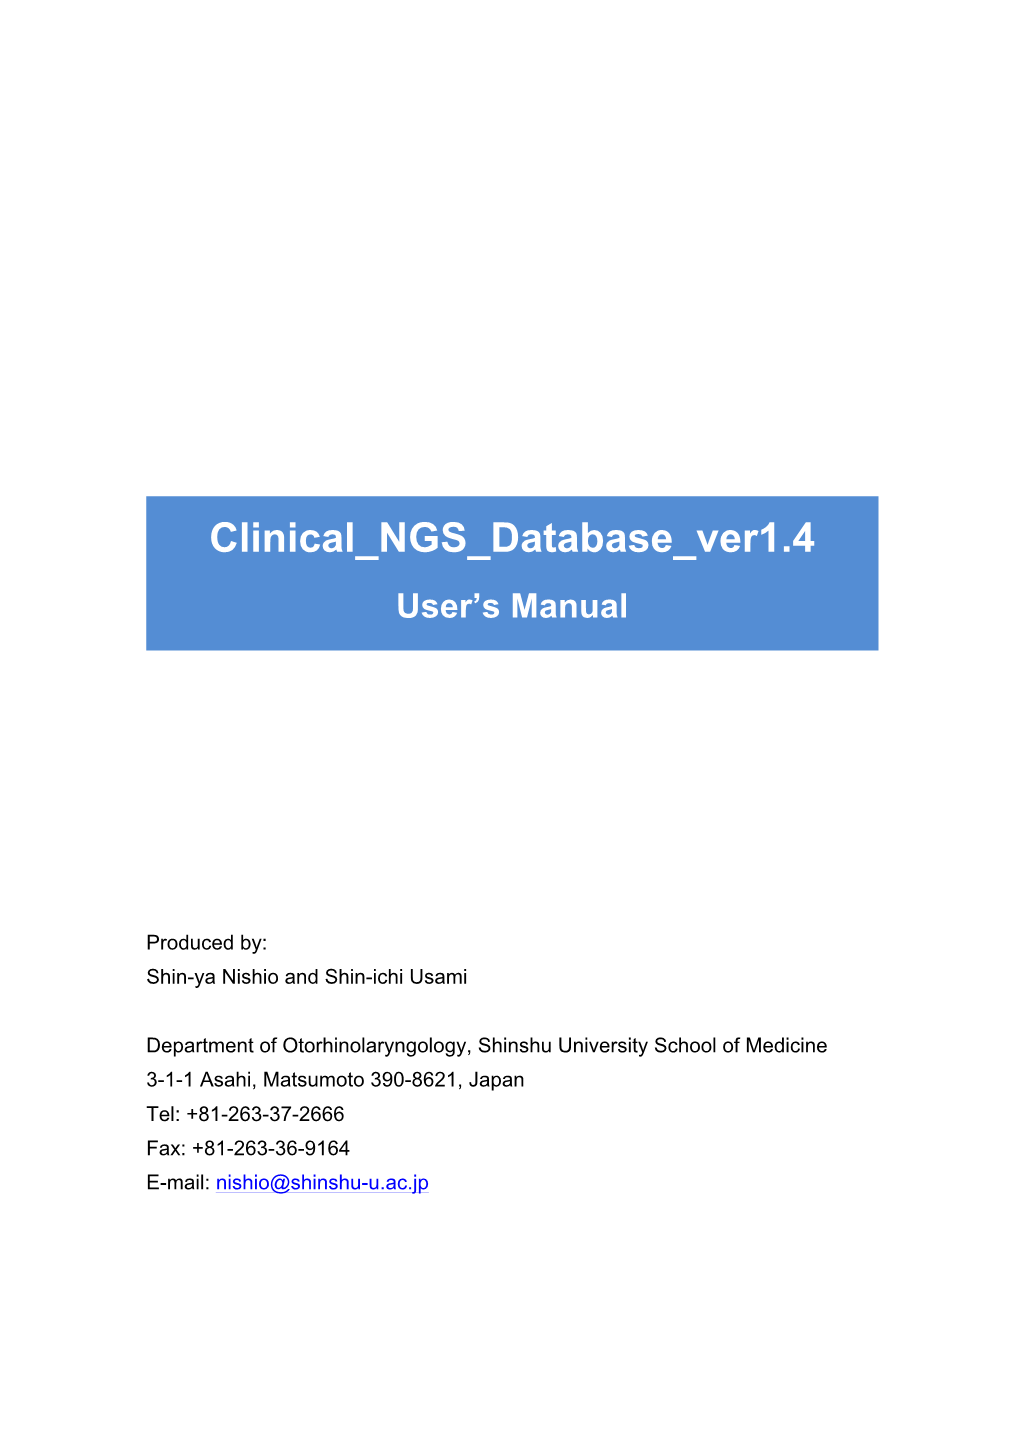 Clinical NGS Database Ver1.4 User’S Manual